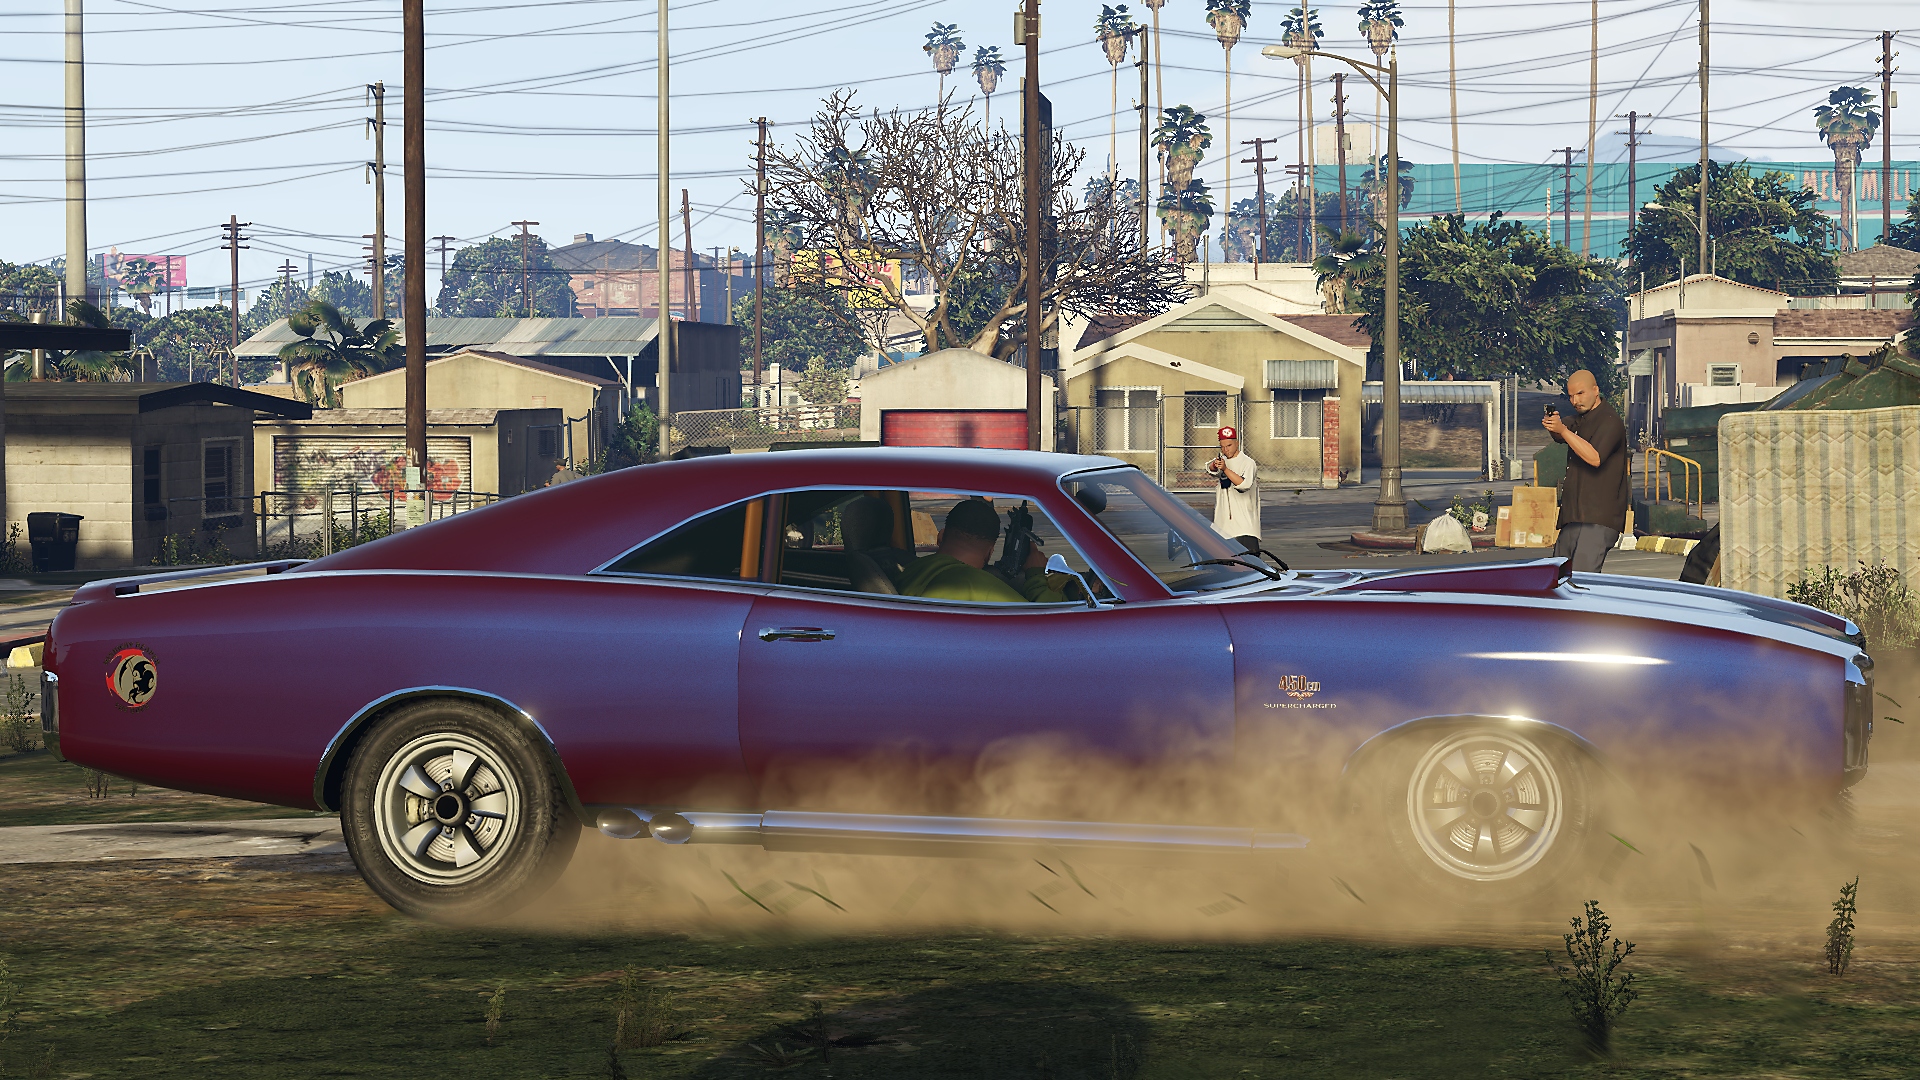 Grand Theft Auto V screenshot showing a purple muscle car doing a wheel spin